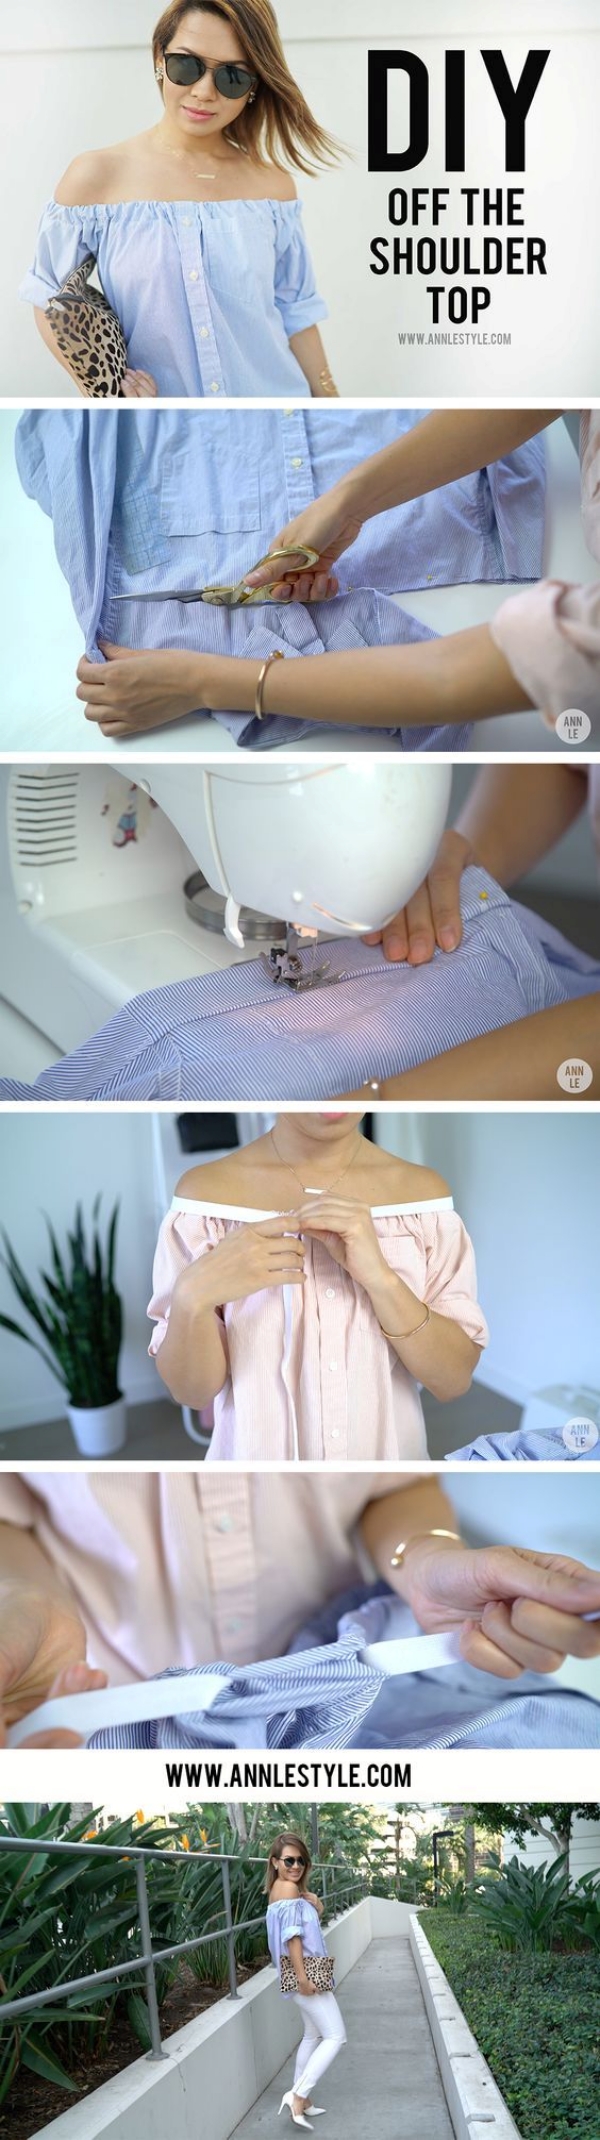 Smart-Refashion-Ideas-to-Upcycle-Outdated-Clothes2